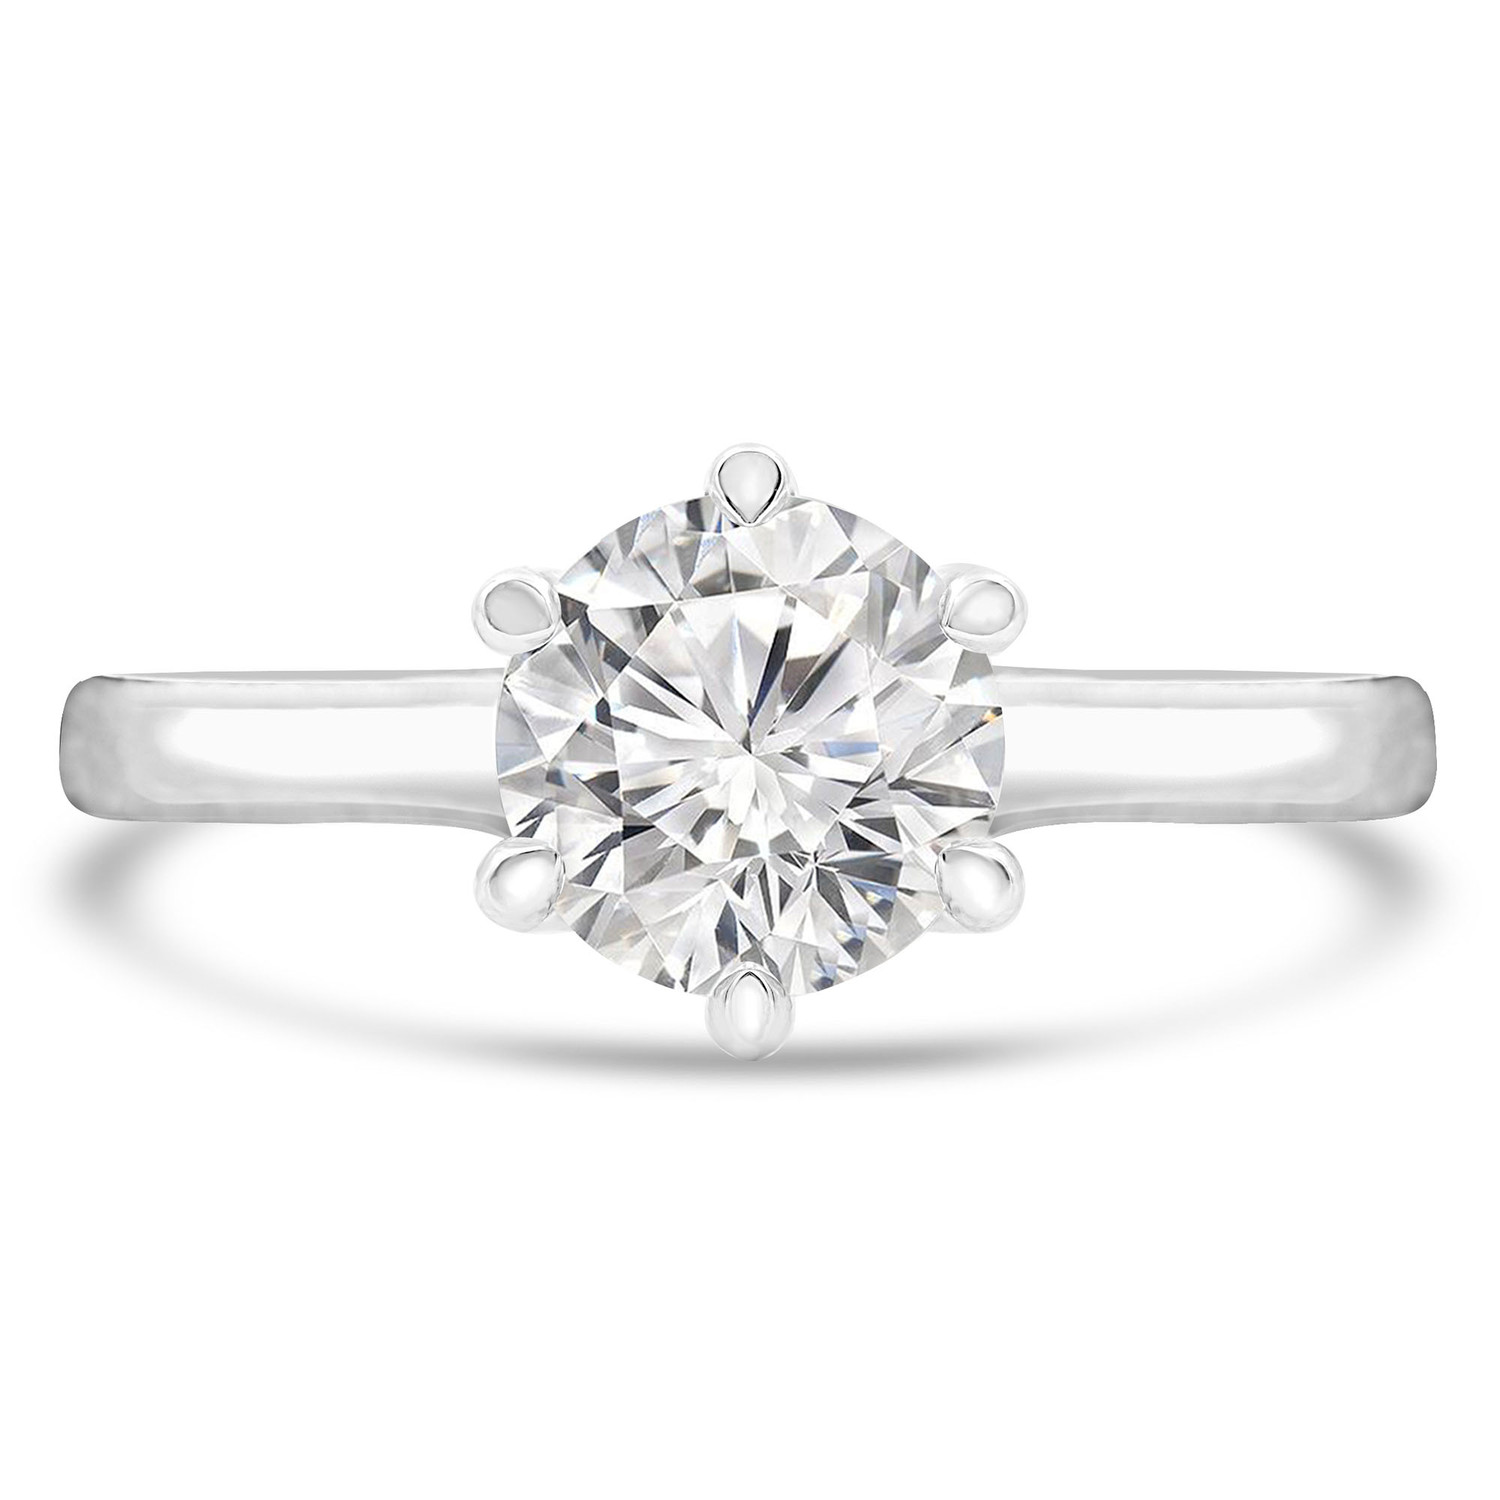 6 Classic Engagement Rings: Traditional Is In - PureWow